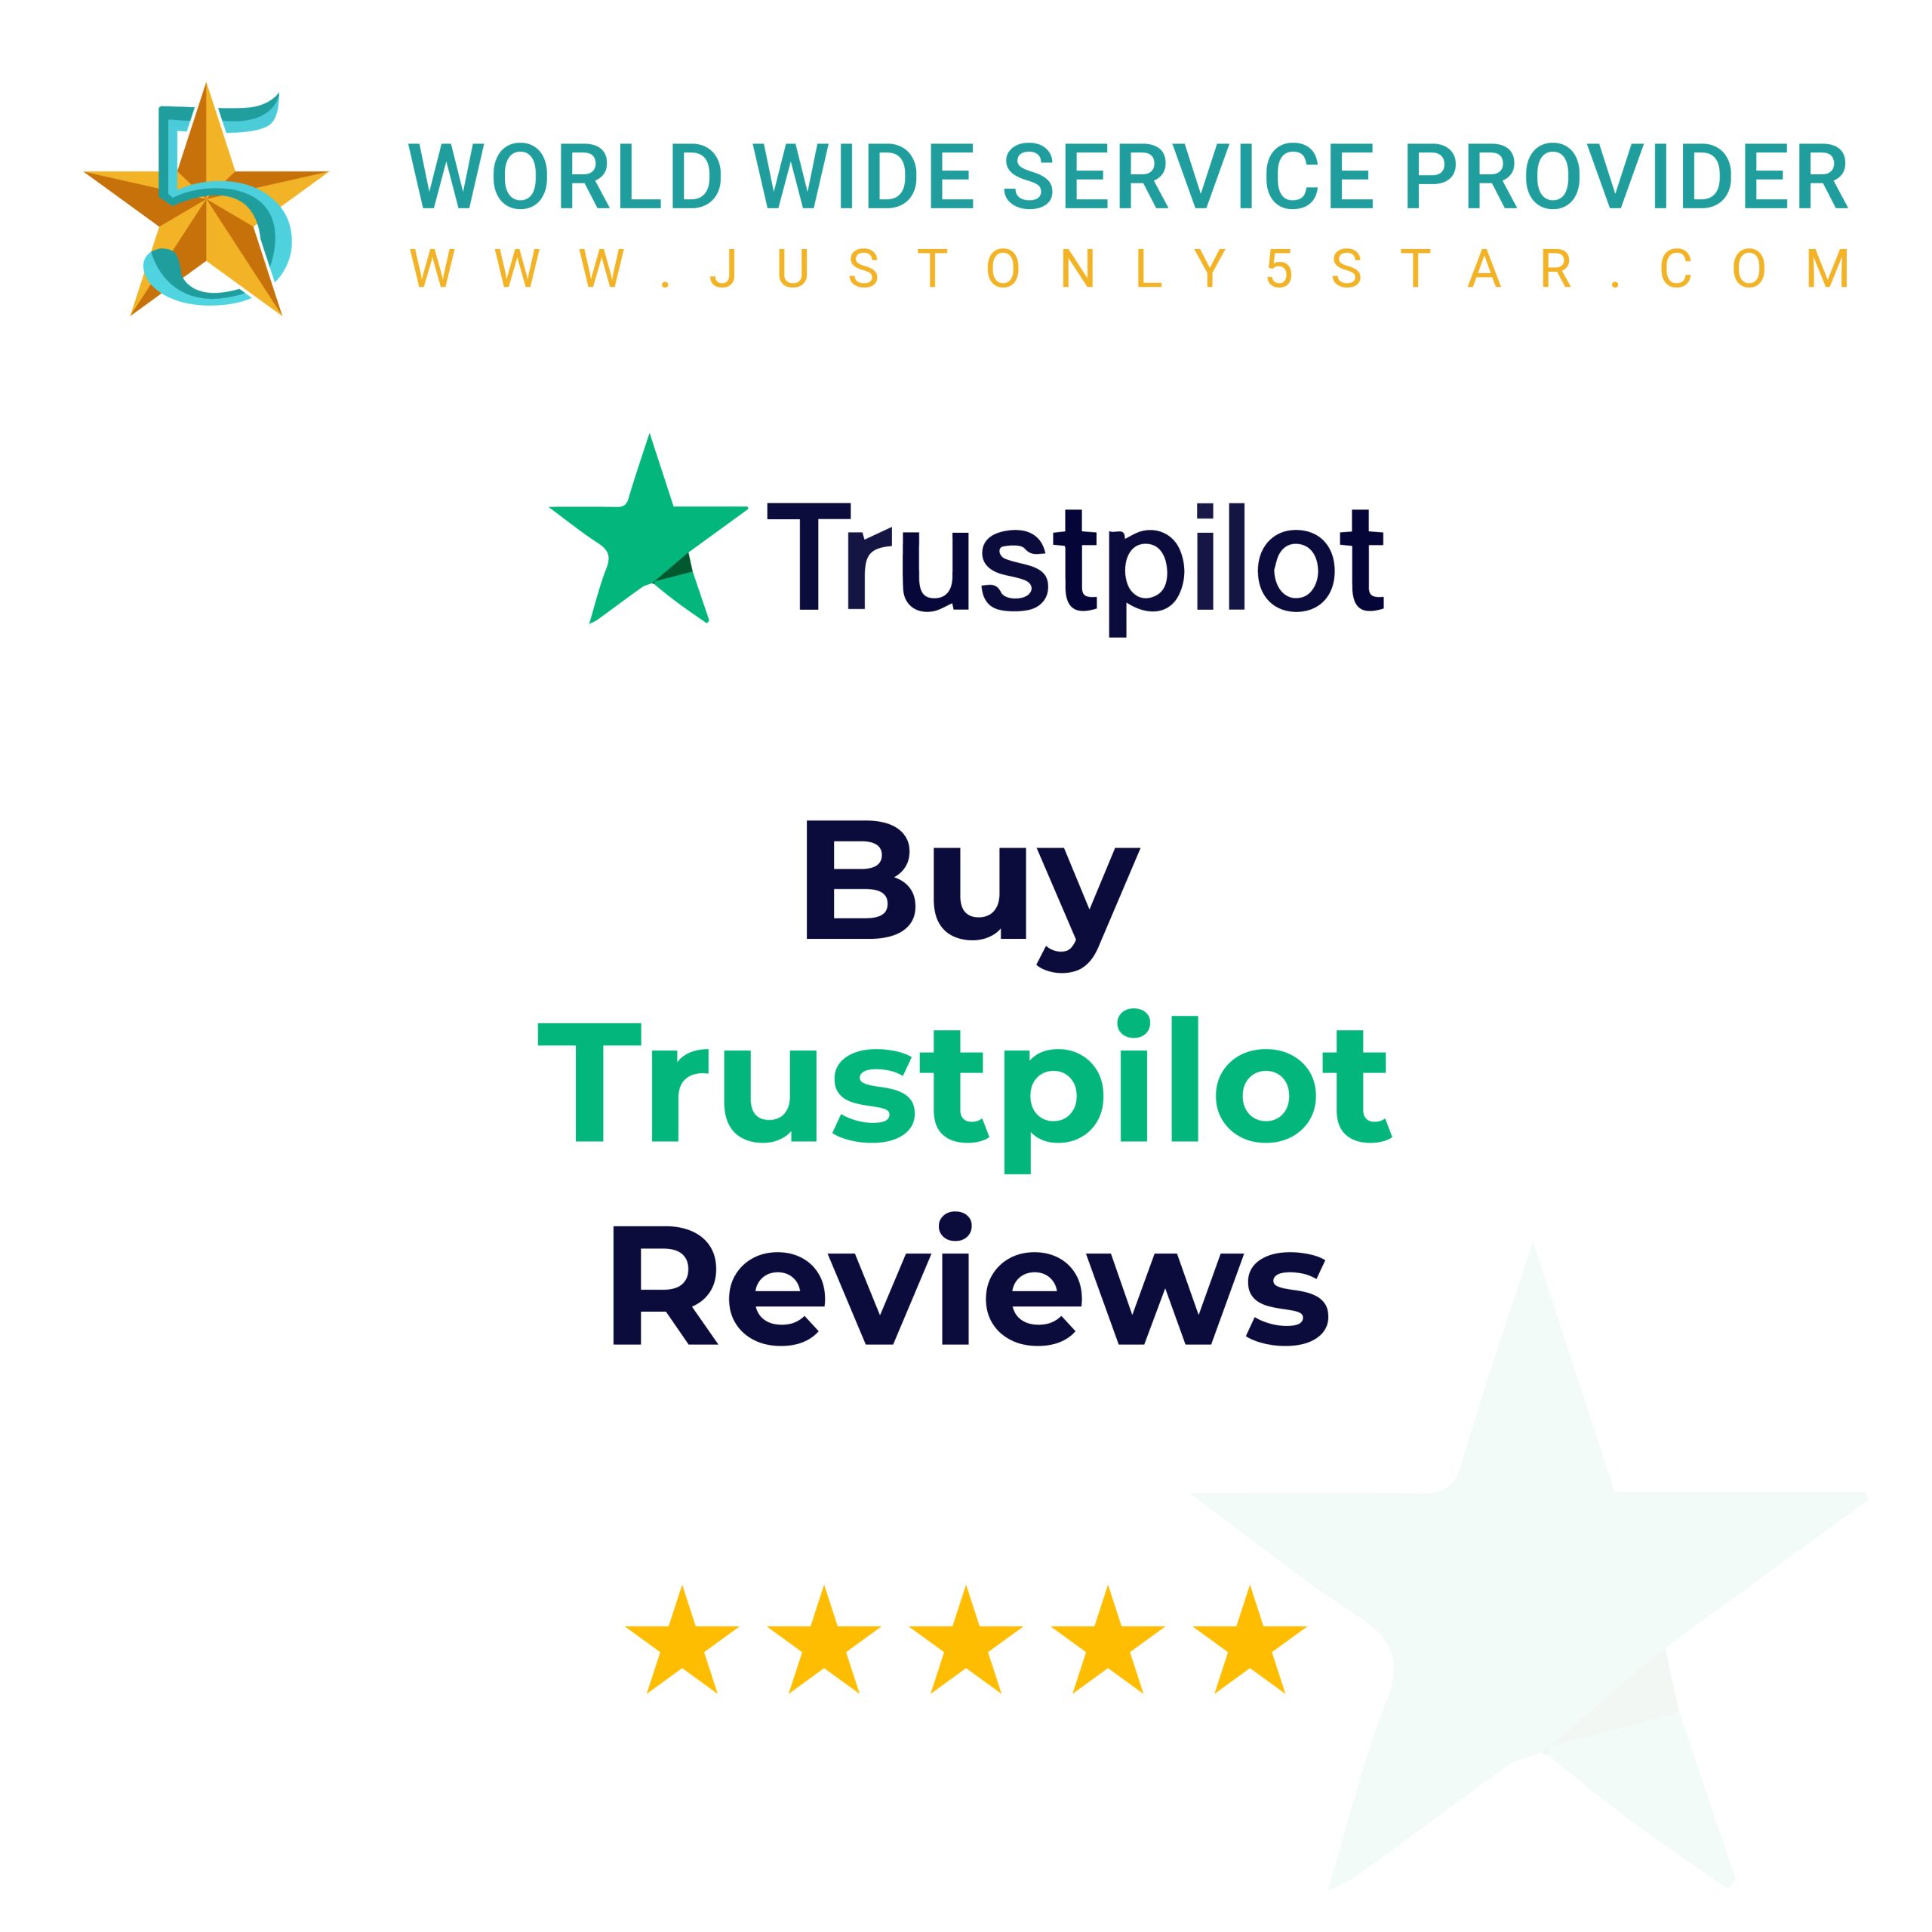 Buy Trustpilot Reviews - 5 Star Ratings for your Business...